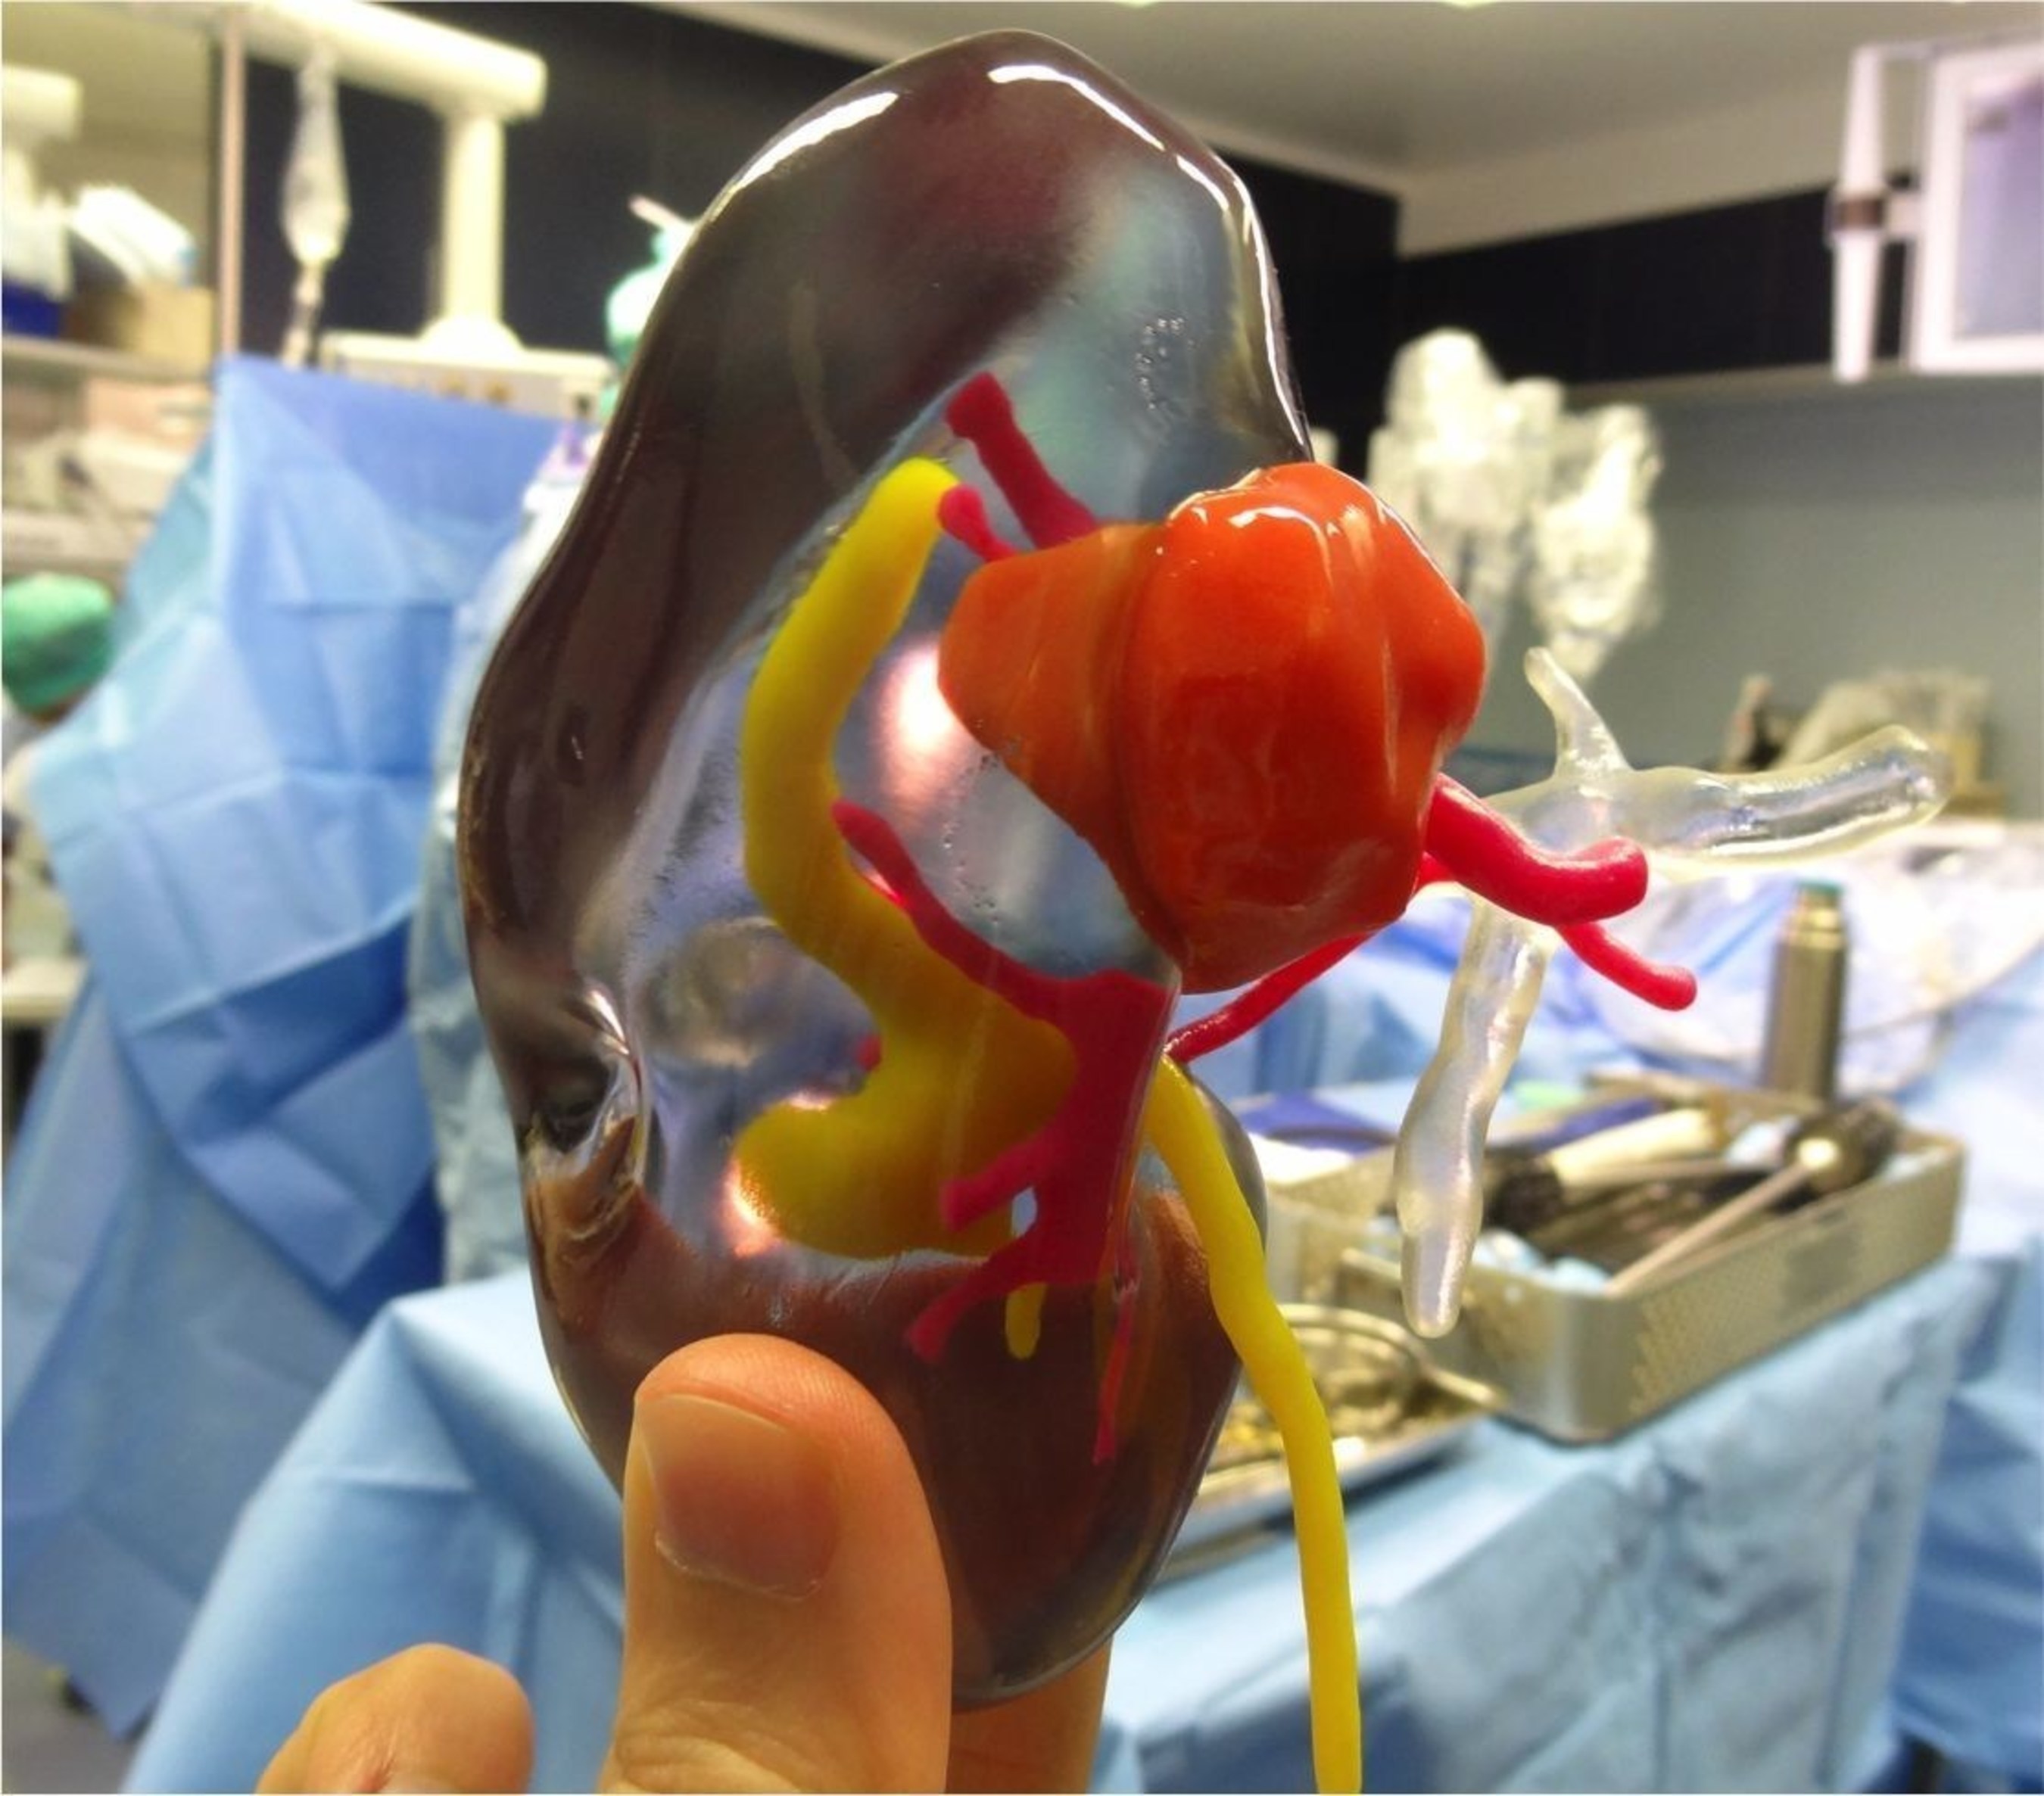 Using Stratasys' transparent VeroClear material enables Dr Bernhard to see inside the kidney and estimate the specific location and depth at which the tumor resides. (PRNewsFoto/Stratasys Ltd) (PRNewsFoto/Stratasys Ltd)